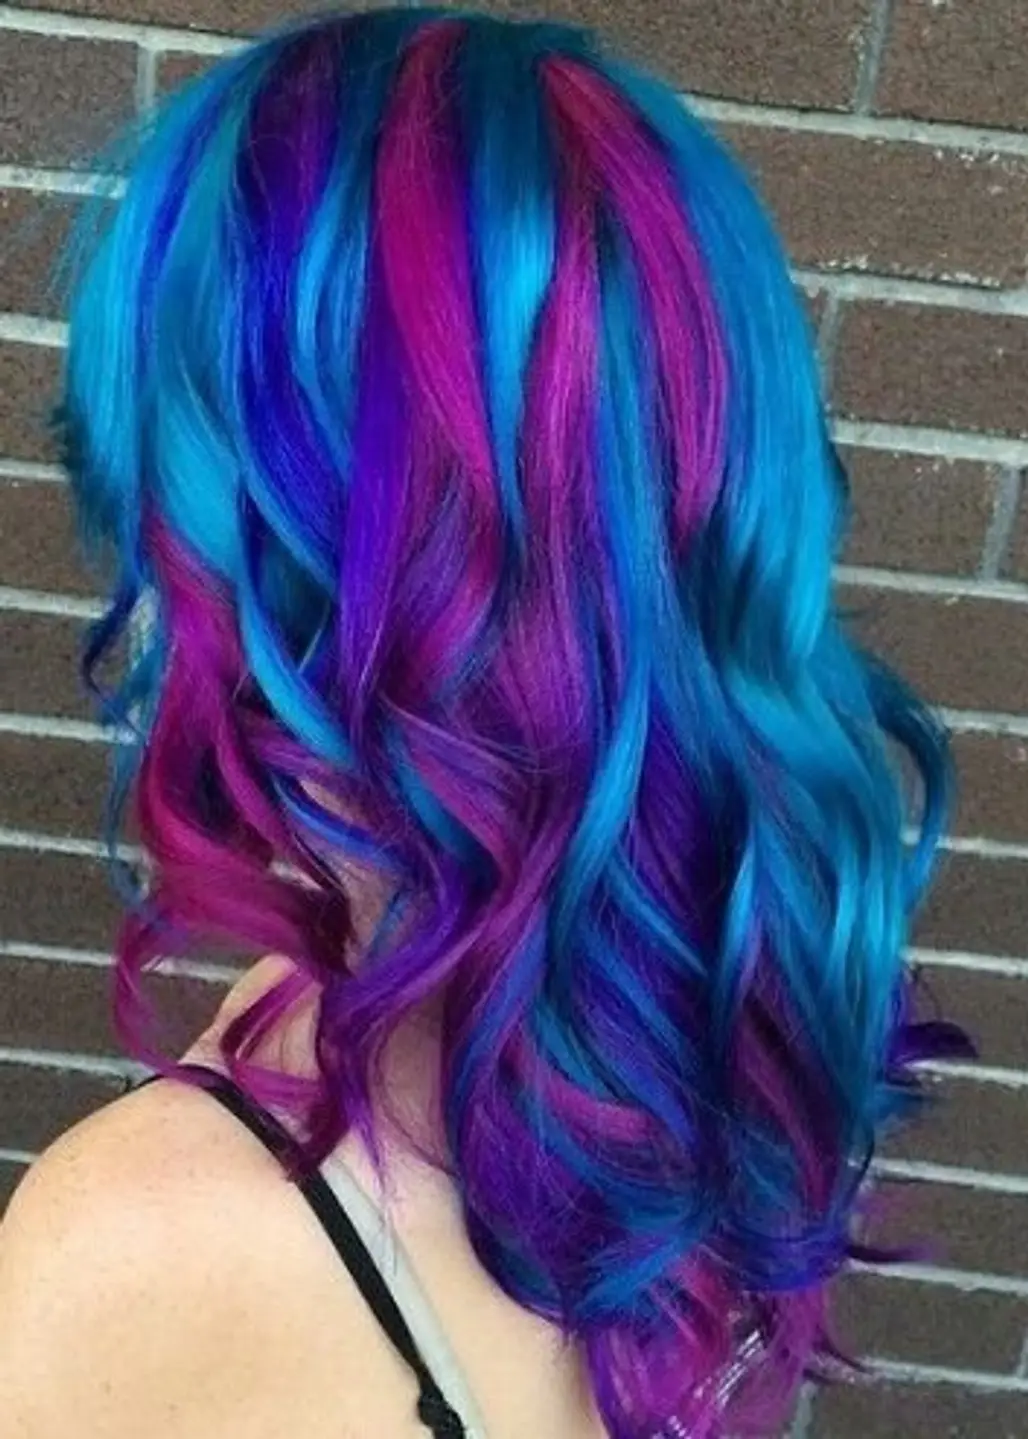 hair,color,purple,hair coloring,hairstyle,